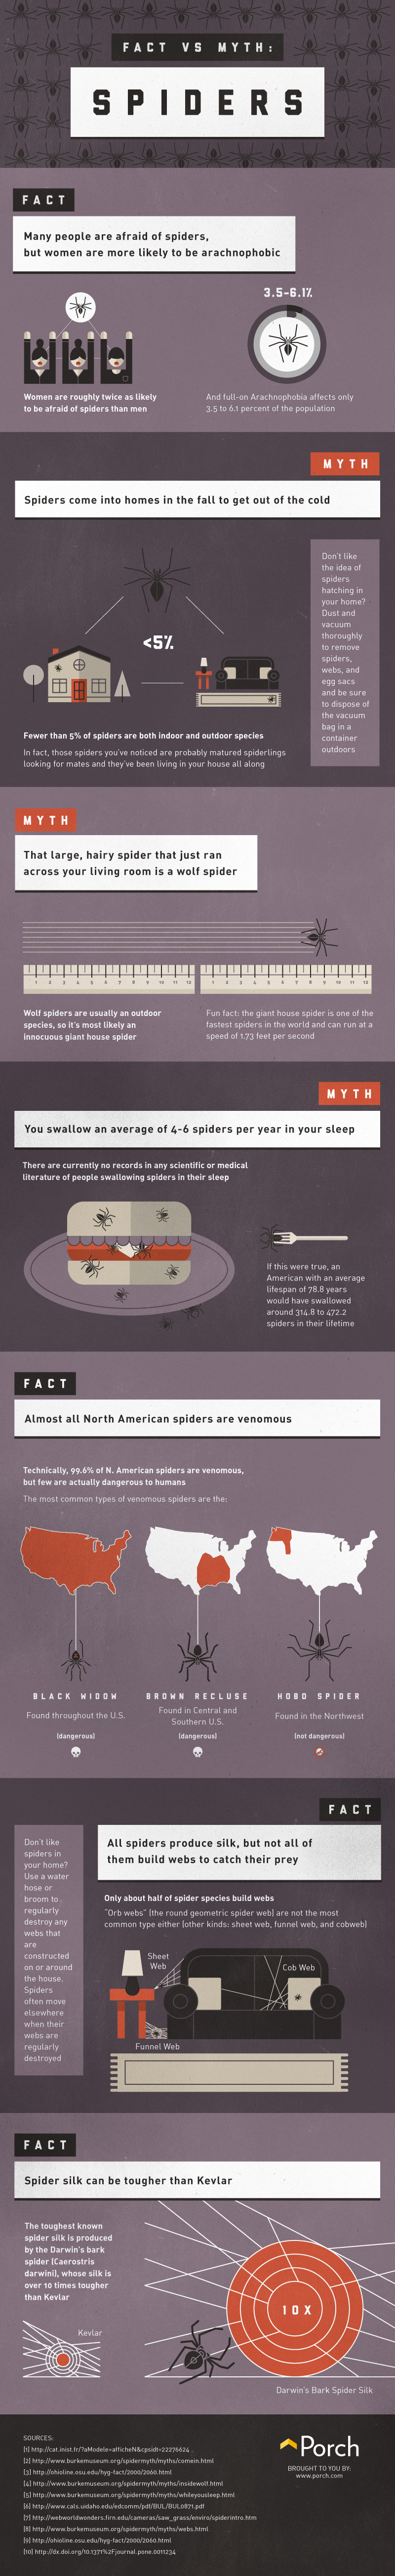 Facts Vs Myths About Spiders